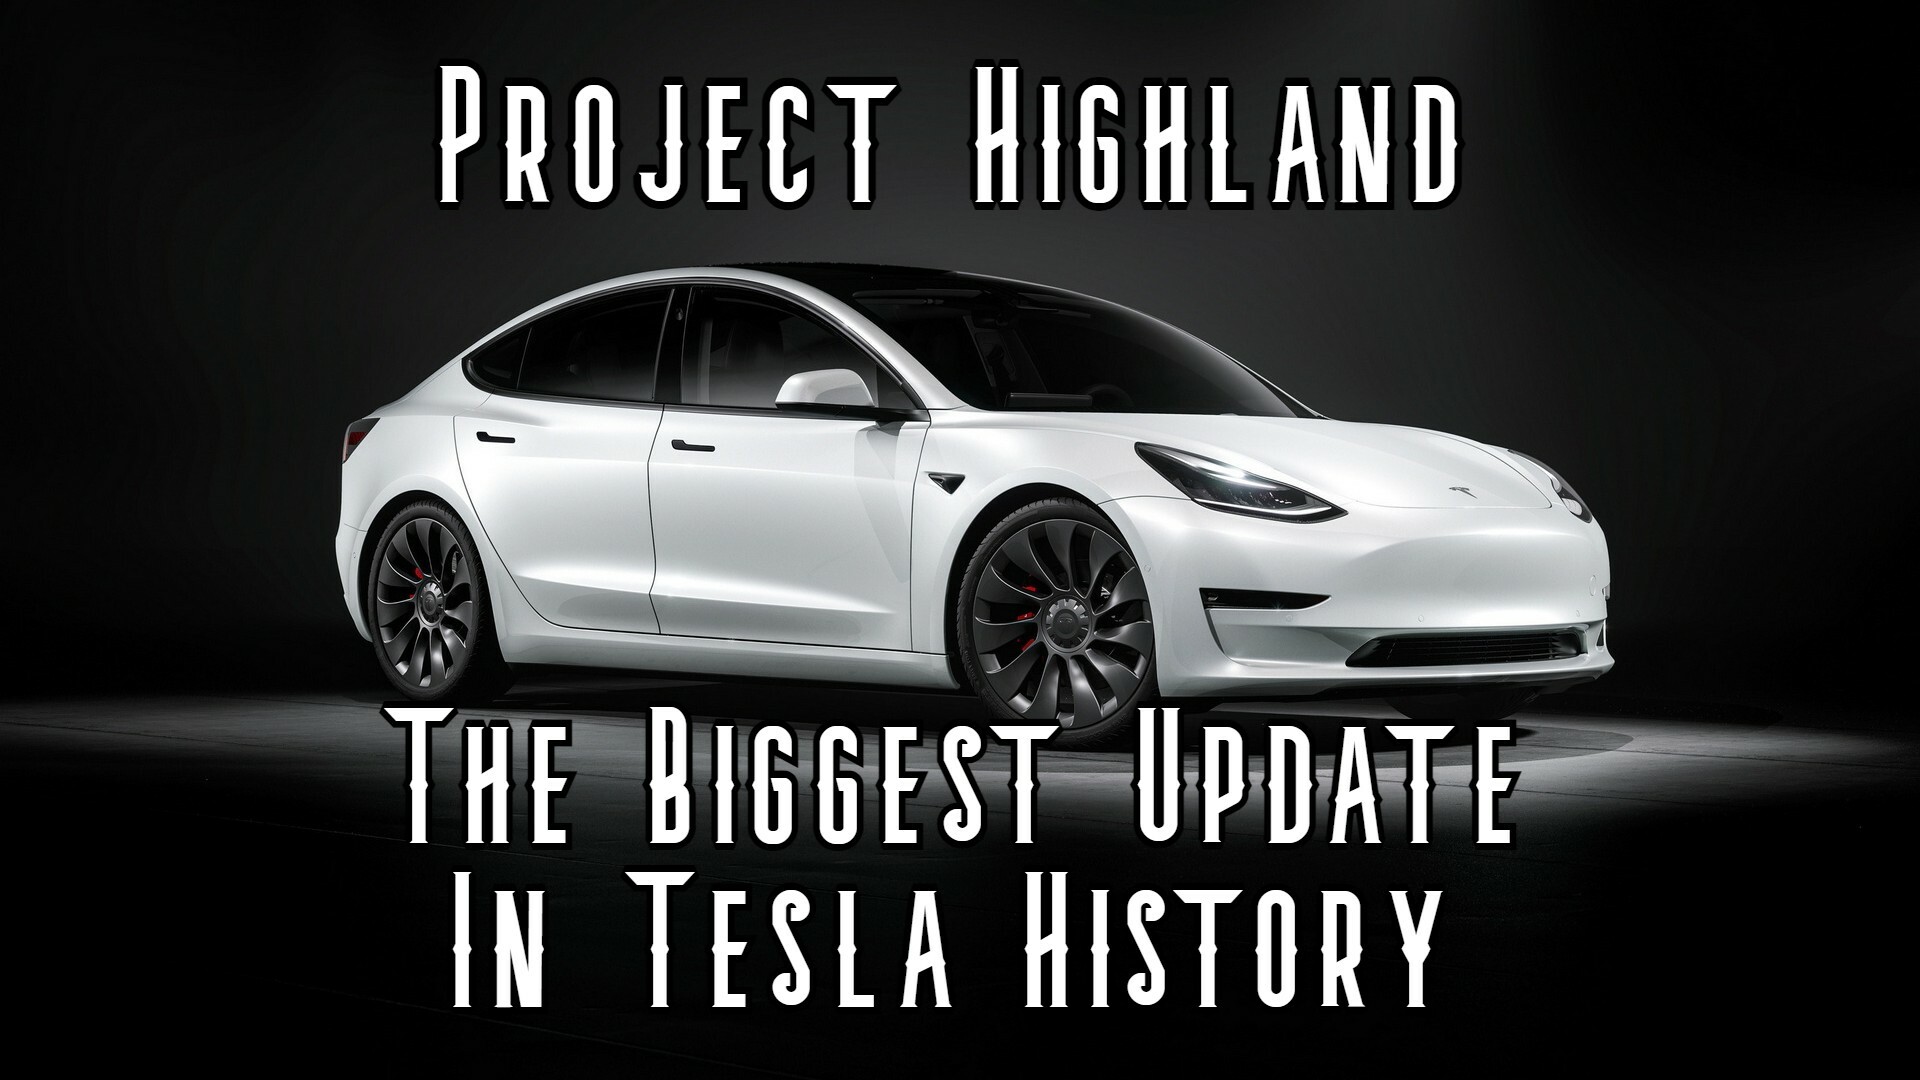 Rumors Suggest That “Project Highland” Model 3 Is The Biggest